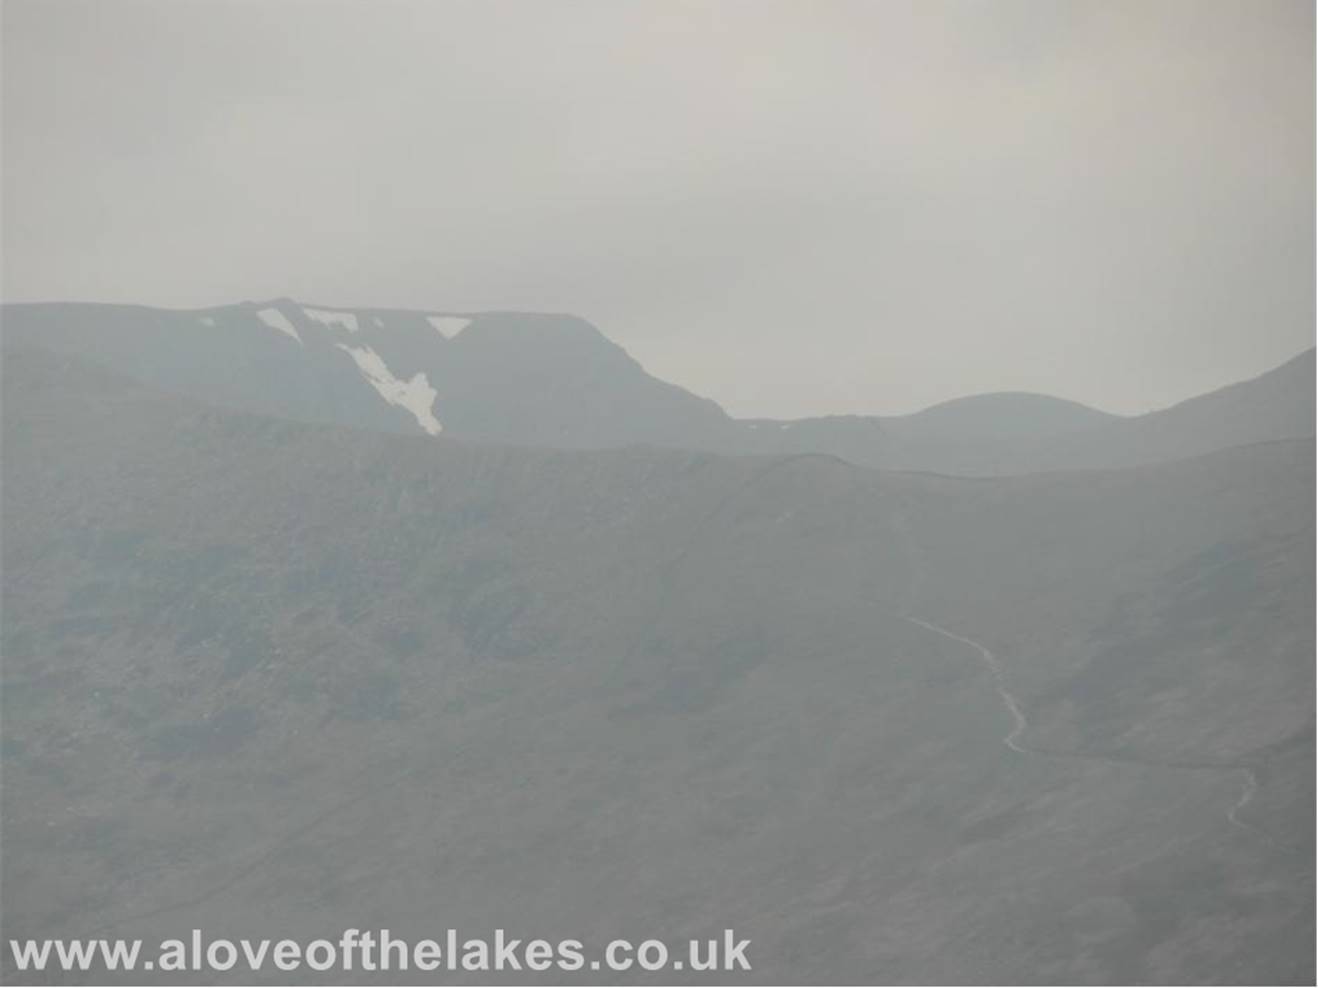 Looking through the haze towards a snow capped Helvellyn